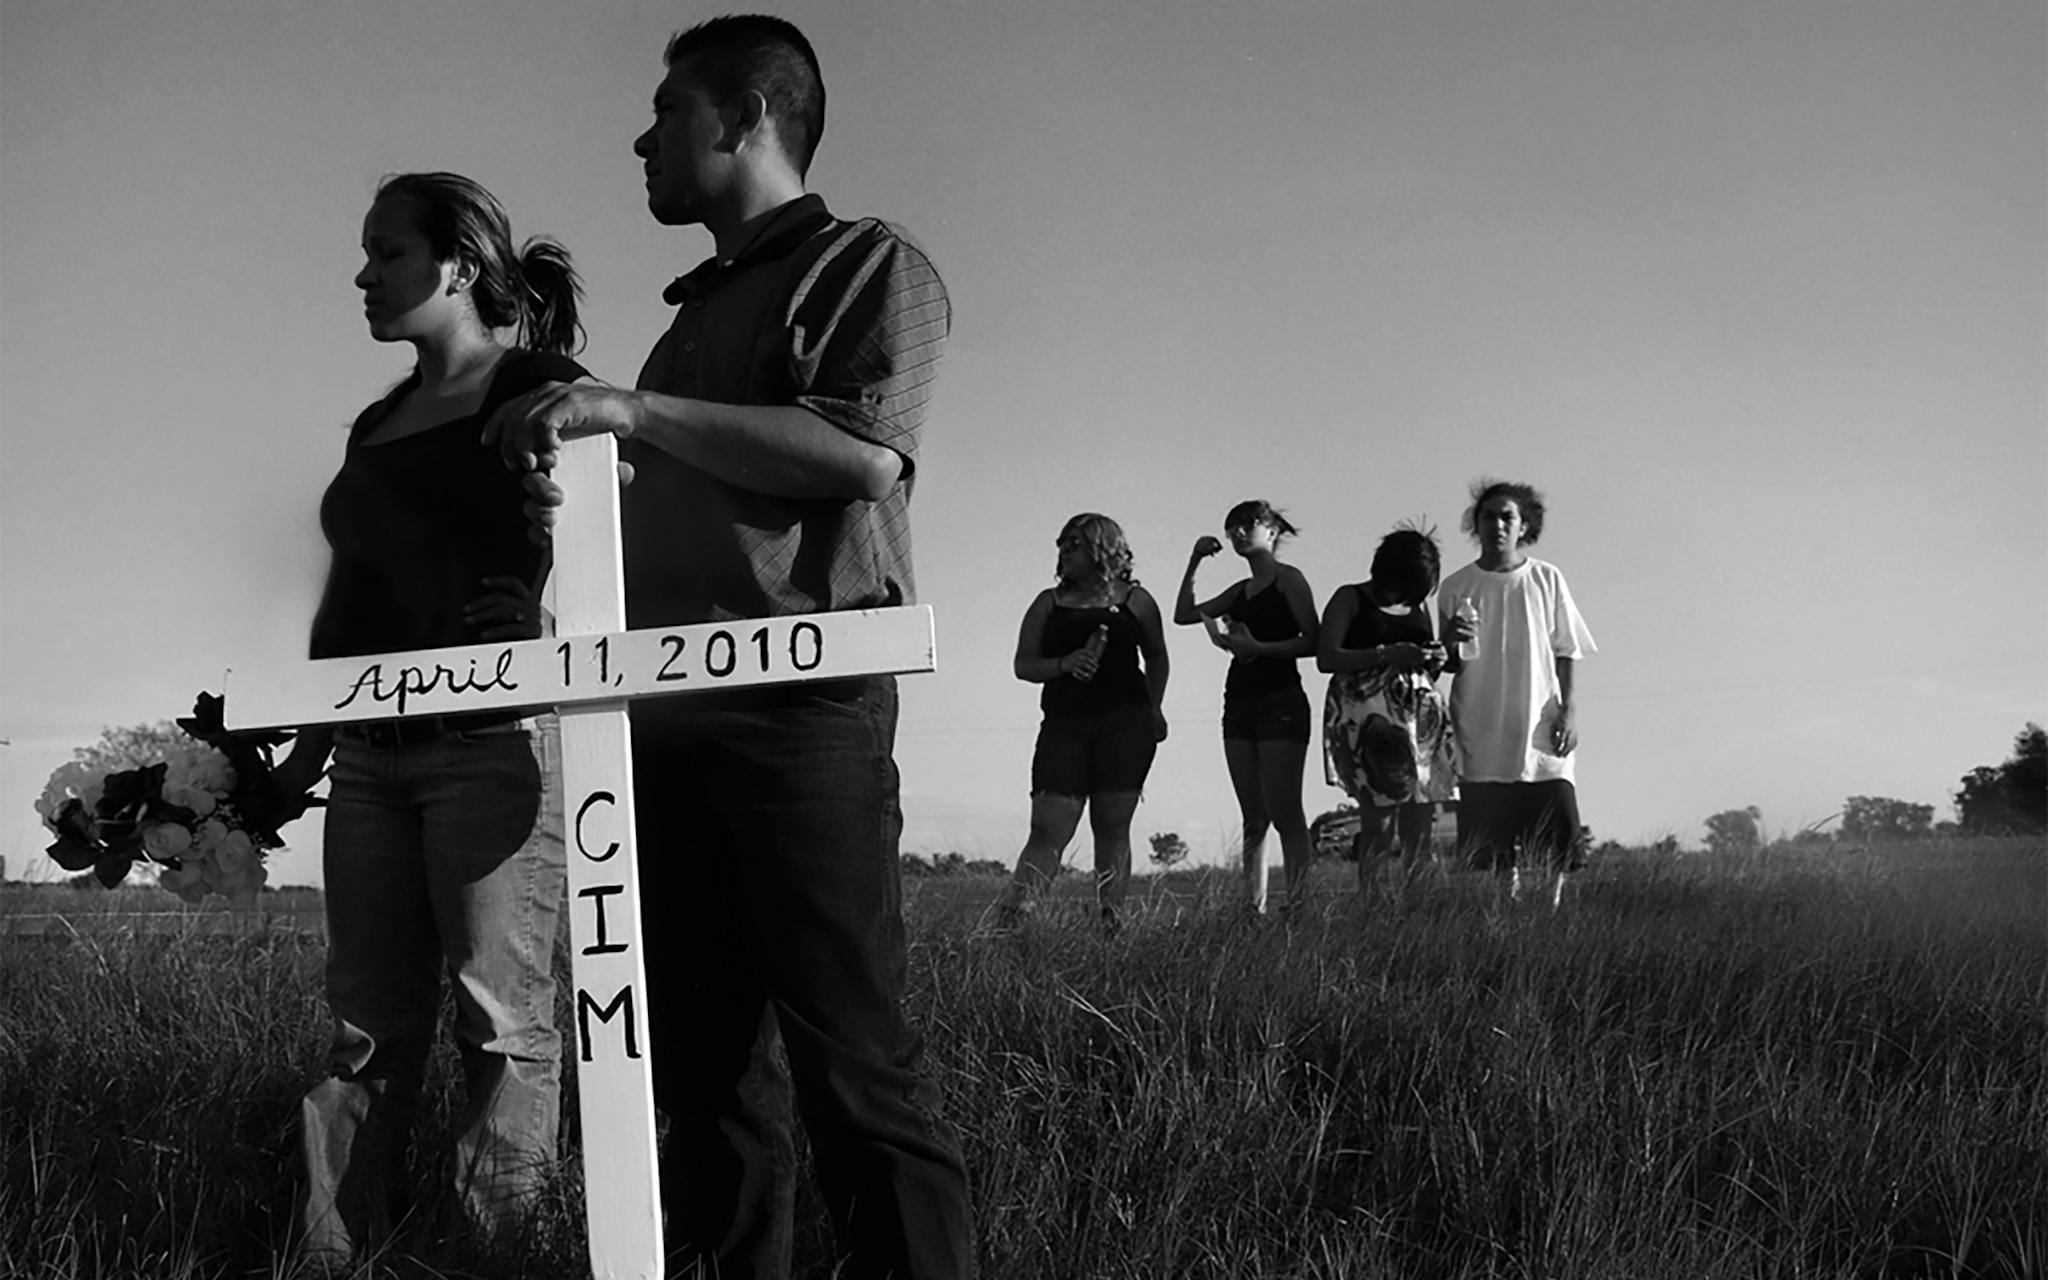 Christian’s family and friends preparing to place a commemorative cross at the site of his fatal accident, along U.S. 290, on August 15, 2010.